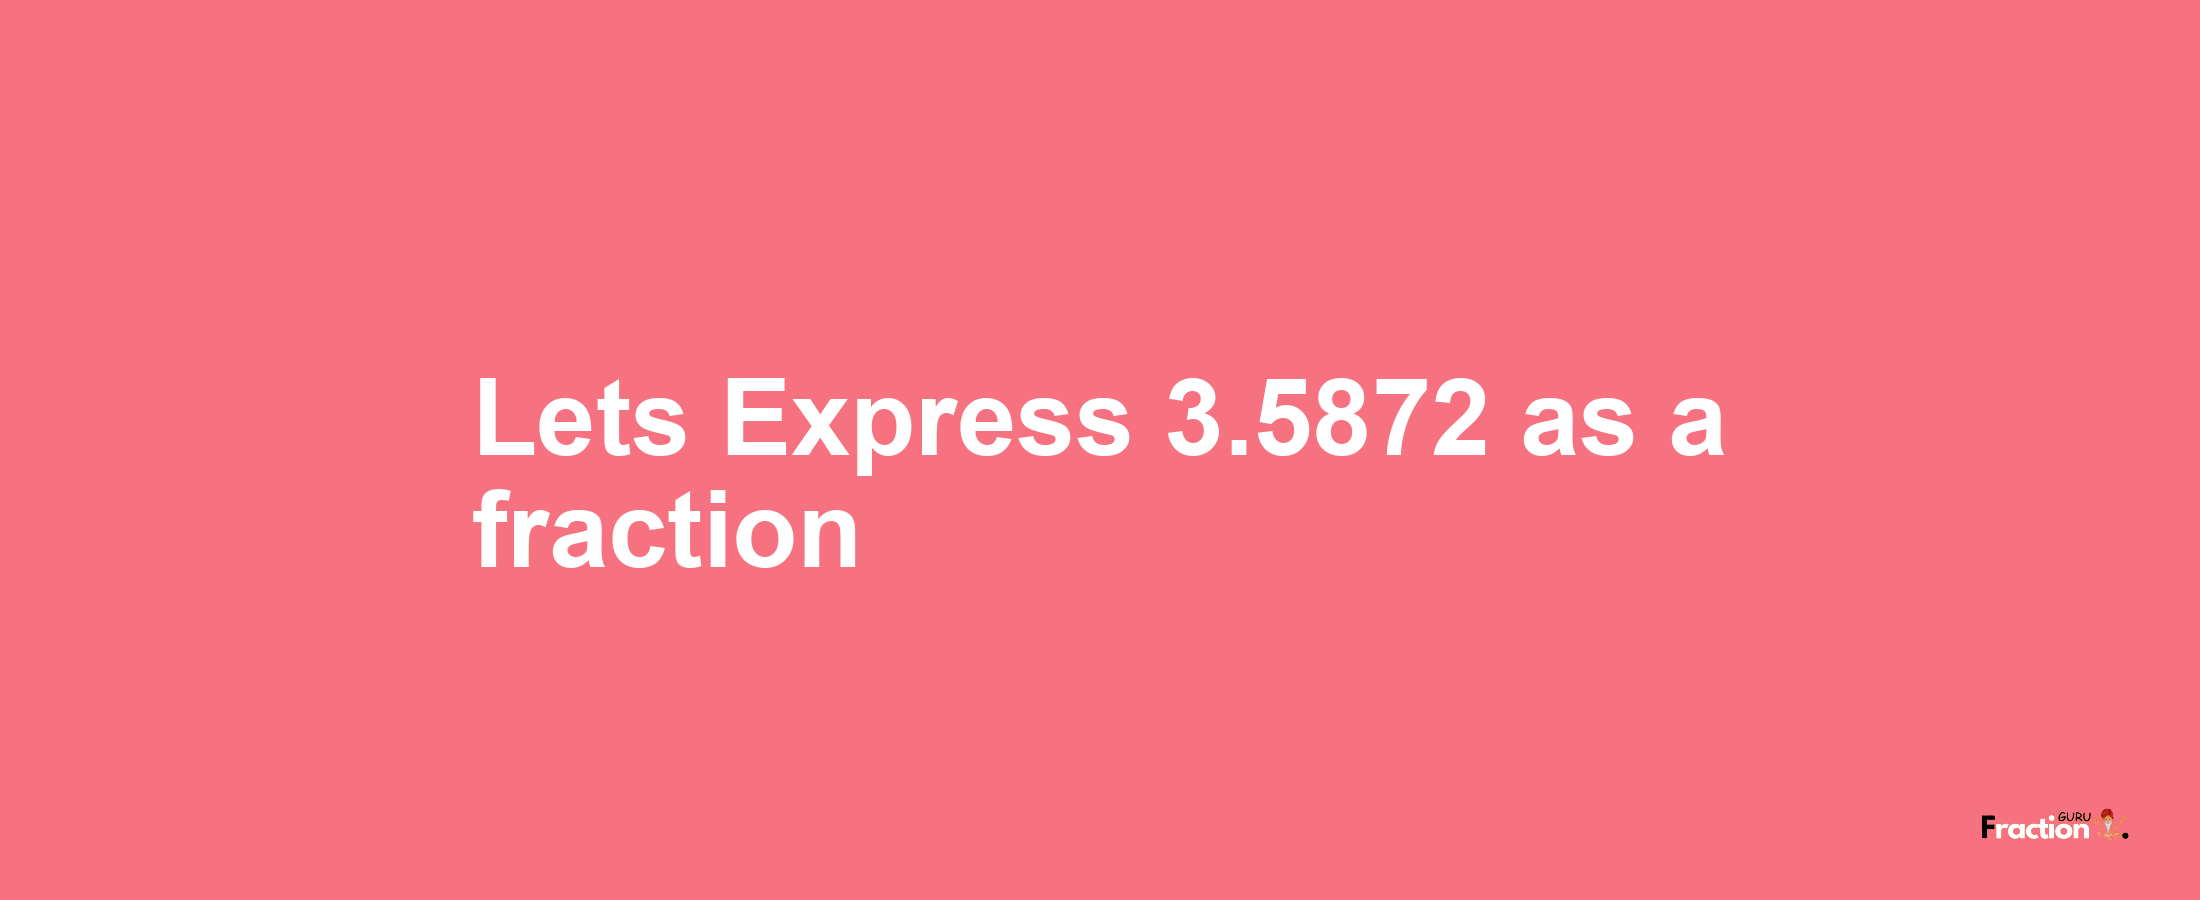 Lets Express 3.5872 as afraction